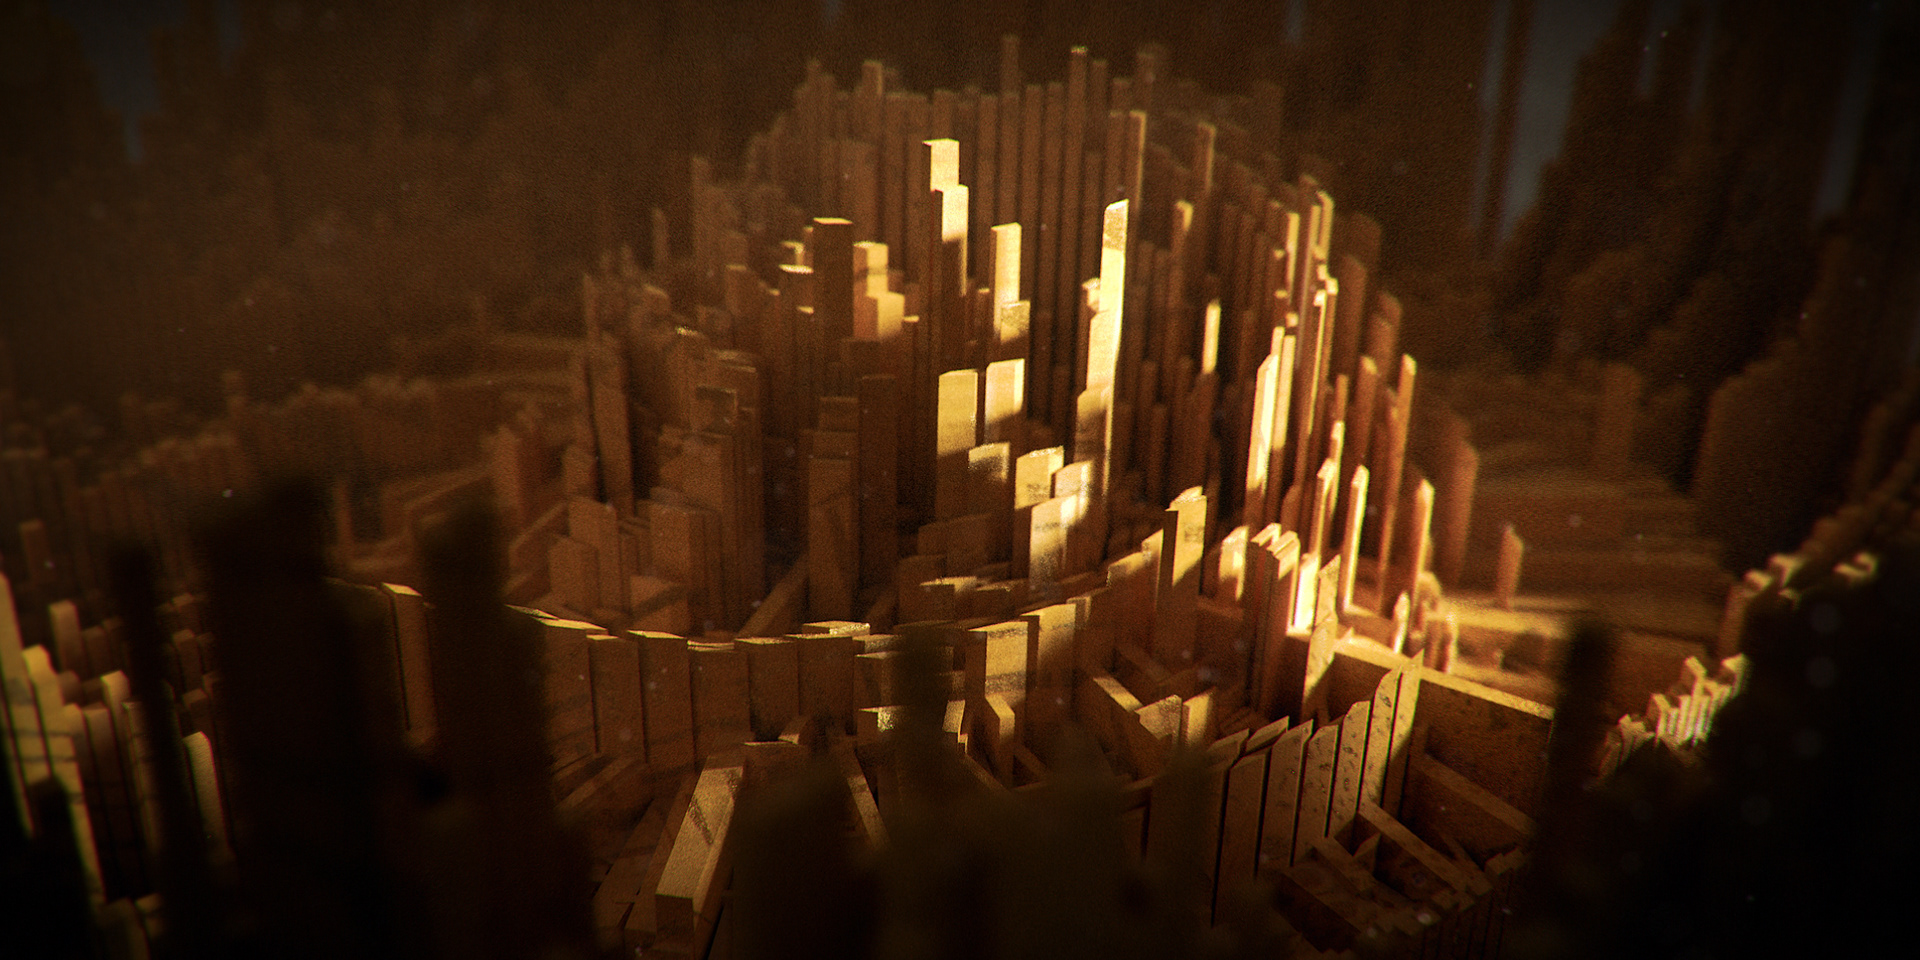 Abstract 3D rendering of geometric shapes lit with dramatic lighting. Made using 3ds Max & Redshift.